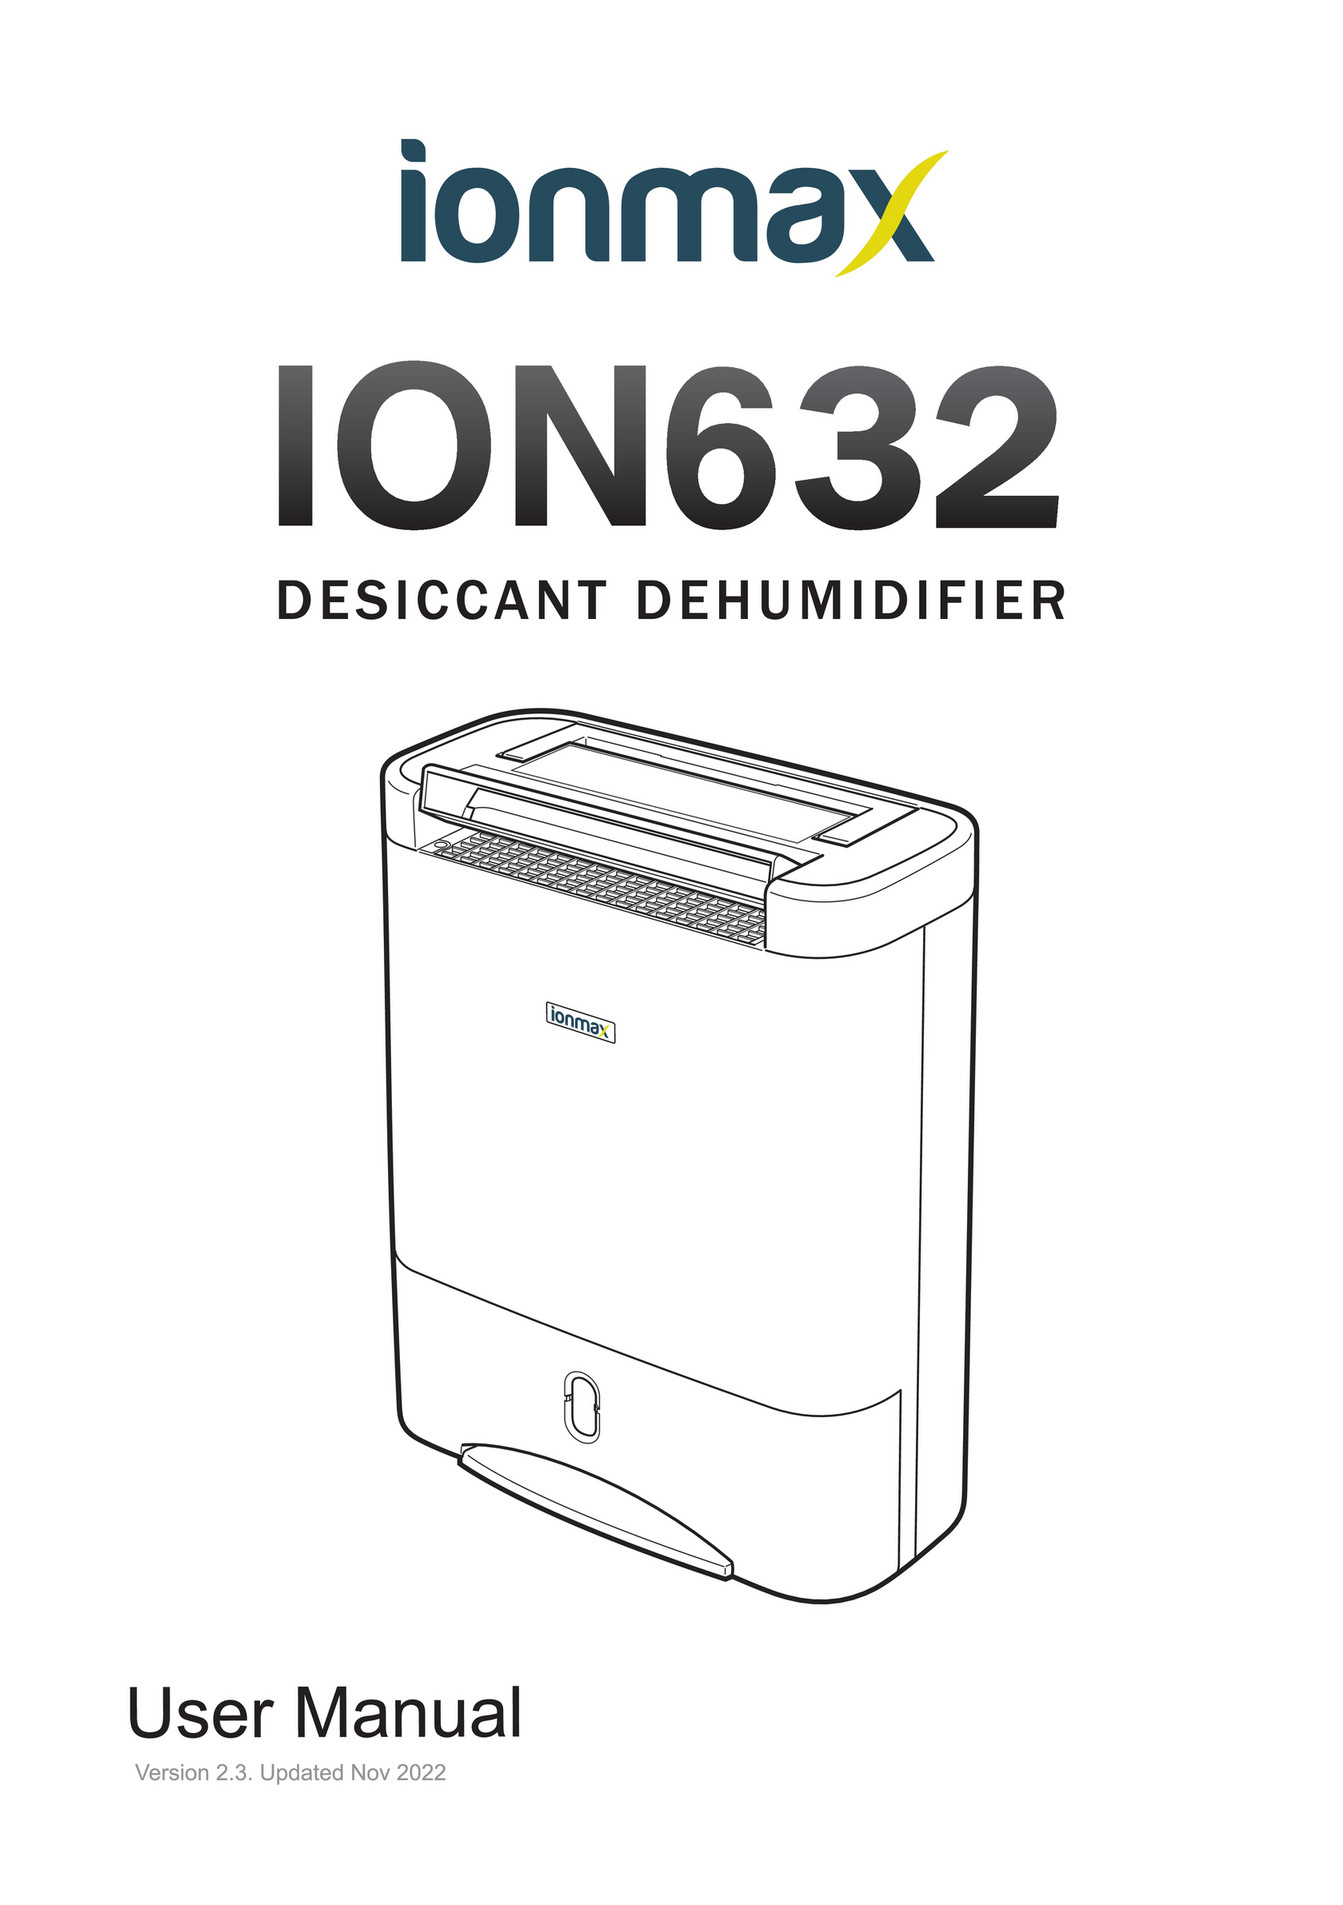 Ionmax Ion632 Desiccant Dehumidifier User Manual Page 1 Created With